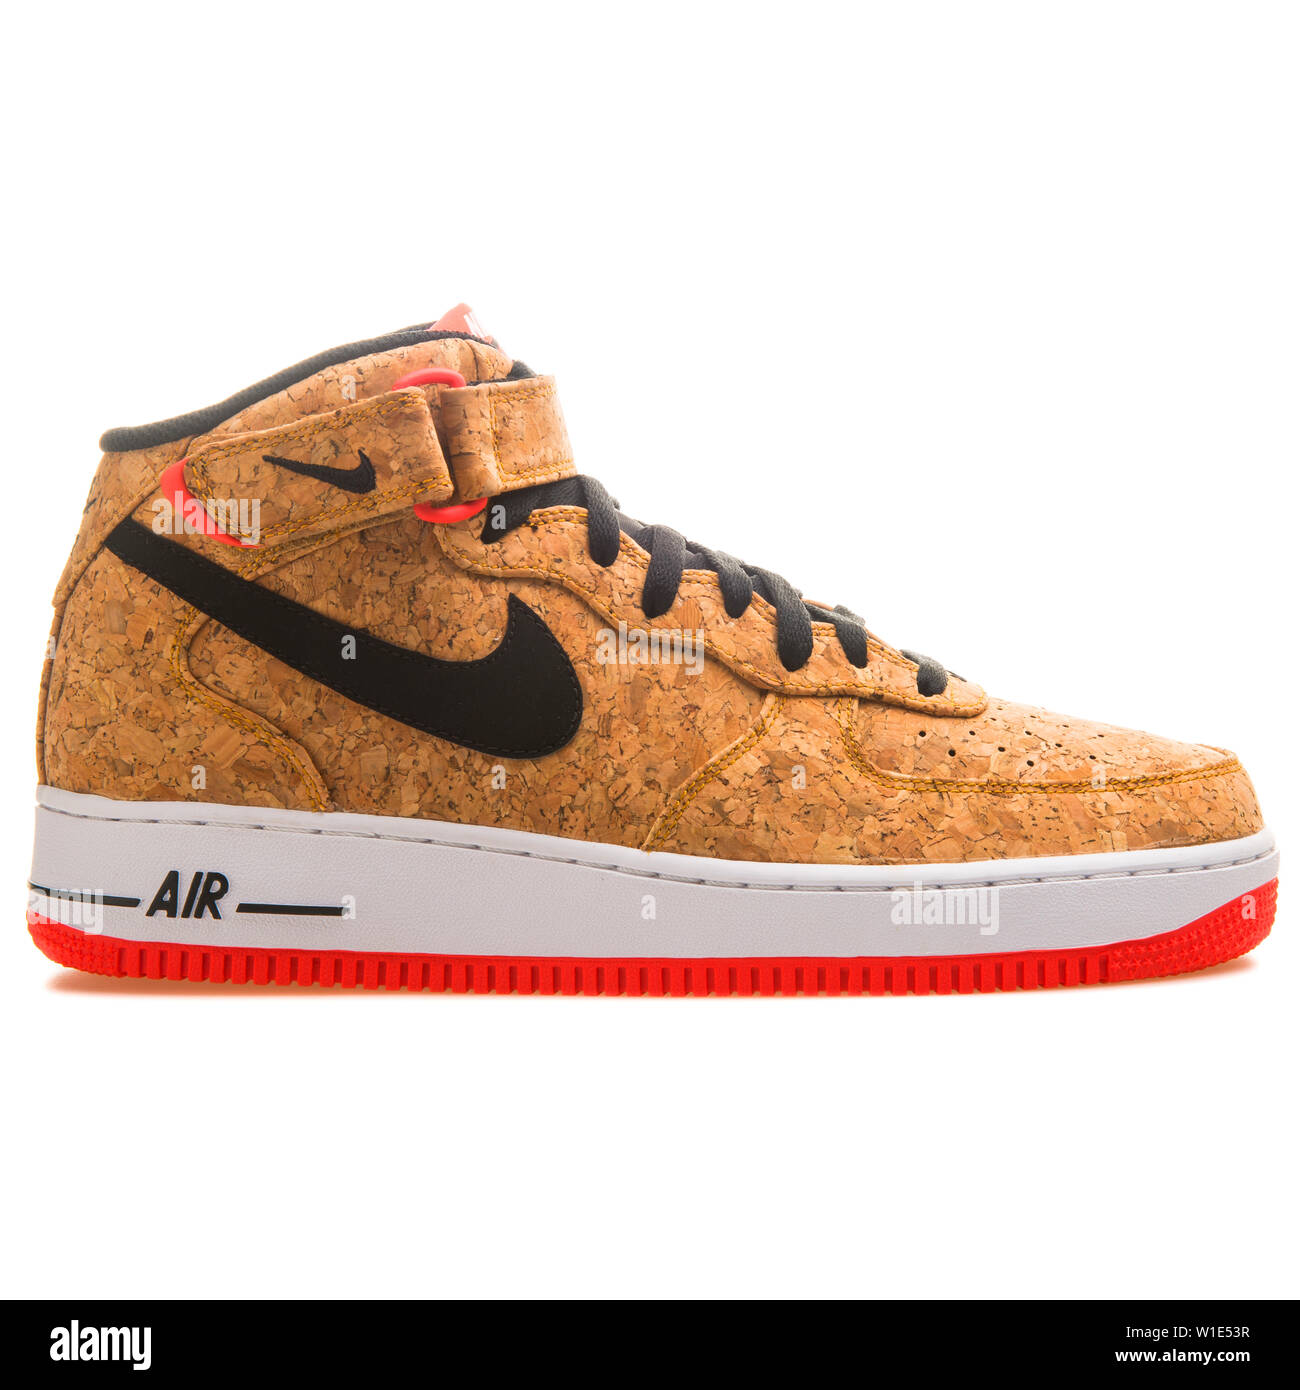 VIENNA, AUSTRIA - AUGUST 25, 2017: Nike Air Force 1 Mid 07 Cork sneaker on  white background Stock Photo - Alamy